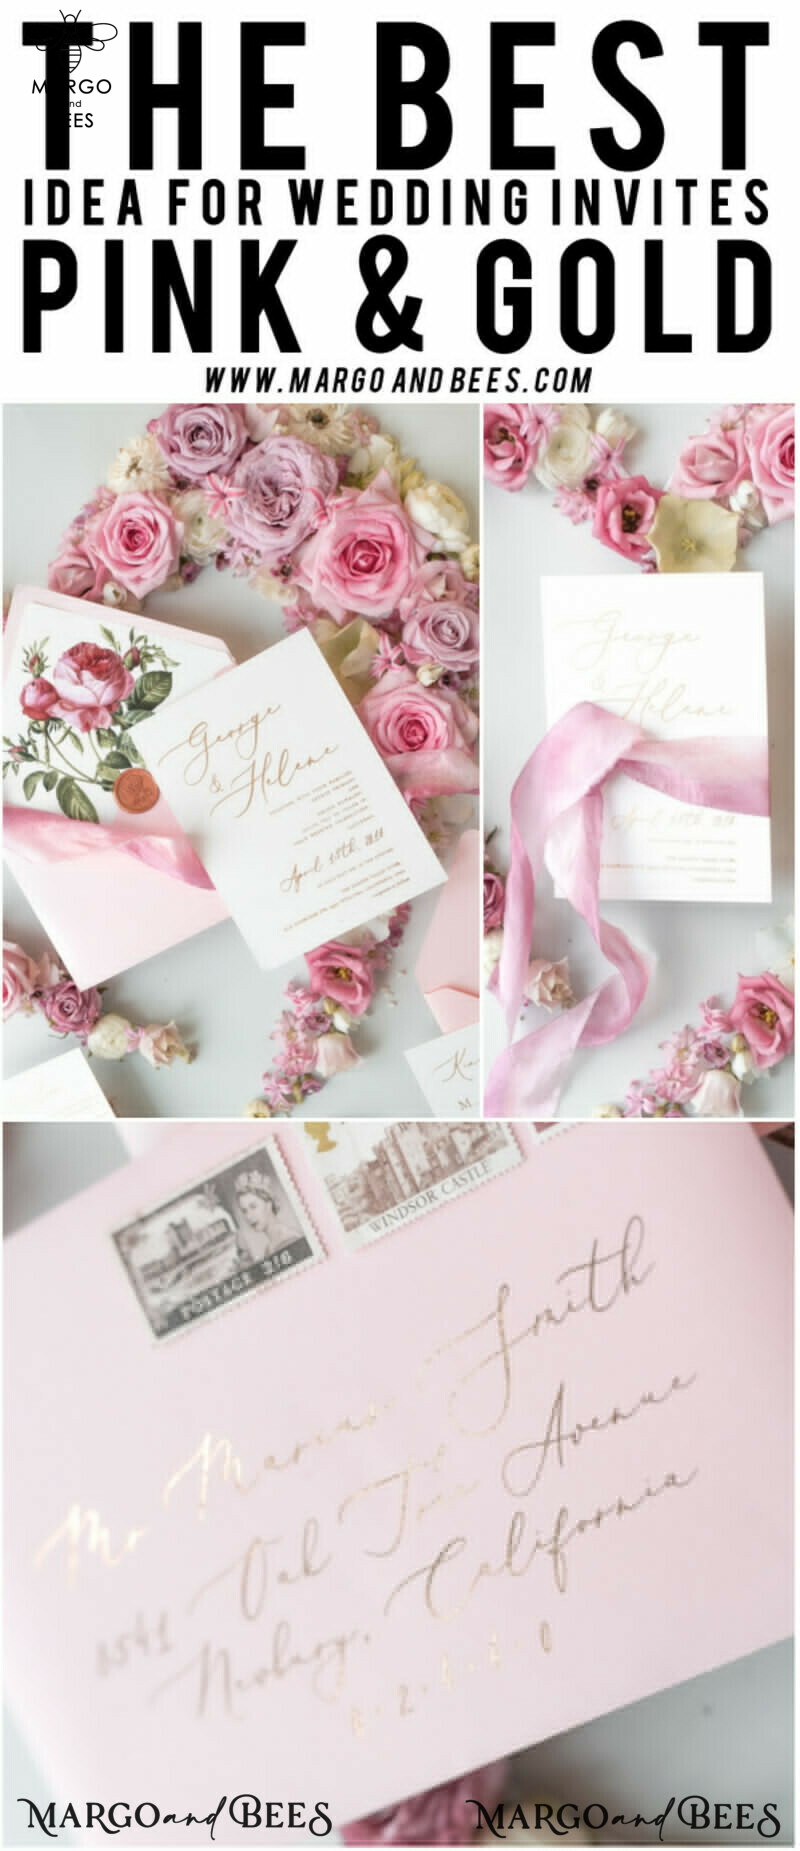 Elegant Personalized Wedding Invitations Romantic Stationery with Vintage Garden Roses and  Handmade Silk Bow Gold Foil Letters  Blush Pink Envelope -44